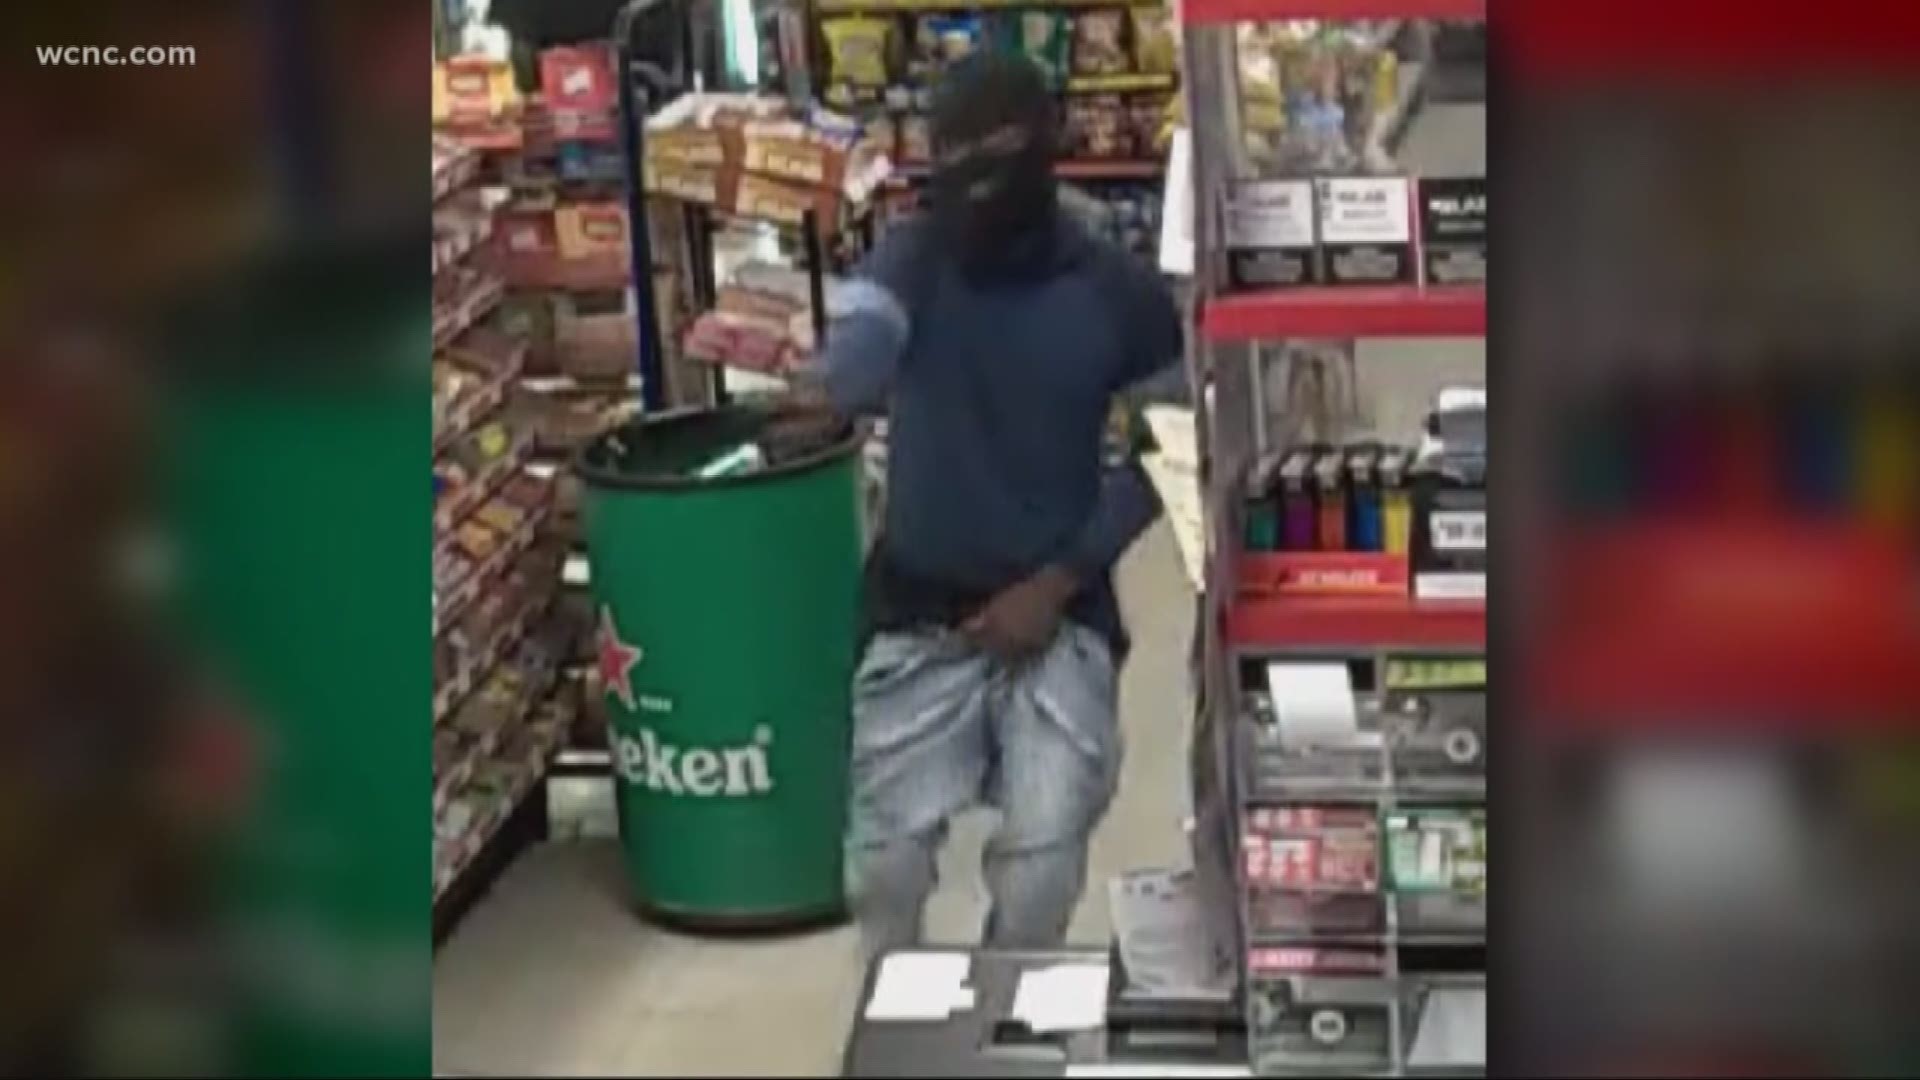 Police are still looking for the masked man who shot and killed the 50-year-old beloved clerk earlier this month.